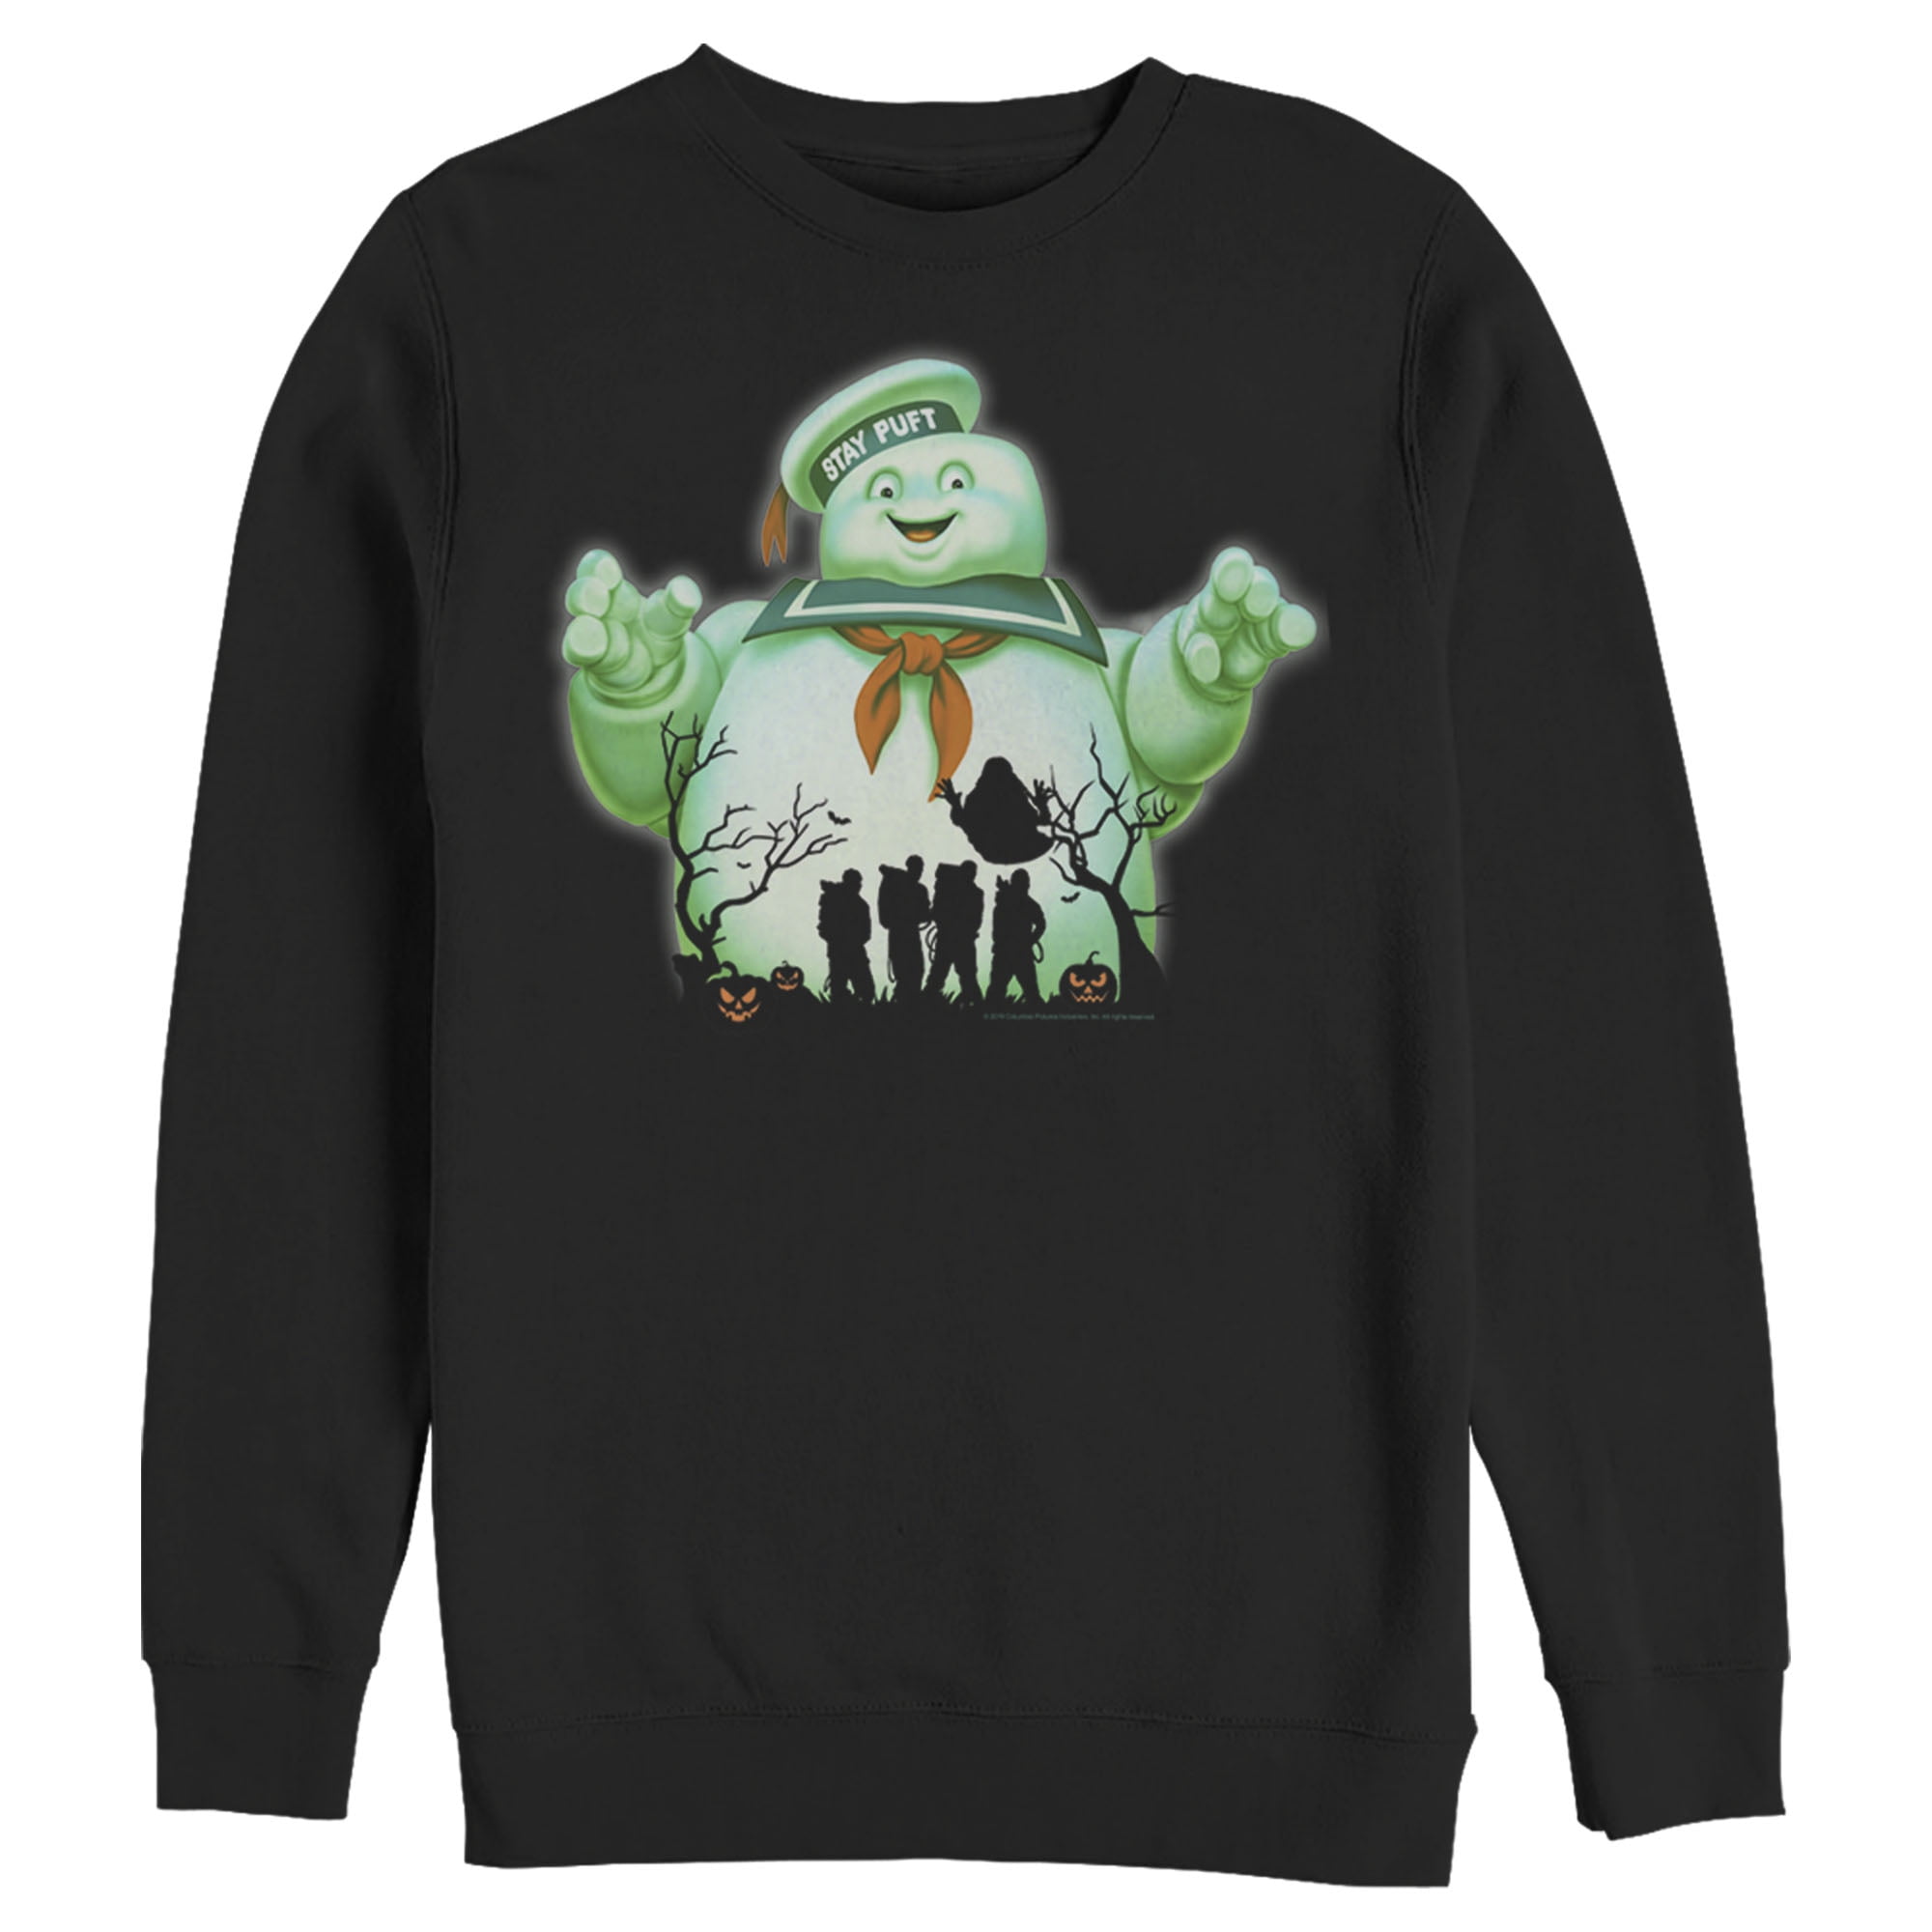 Stay Puft Ghostbusters Inspired Mens Sweater Retro Style Sweatshirt